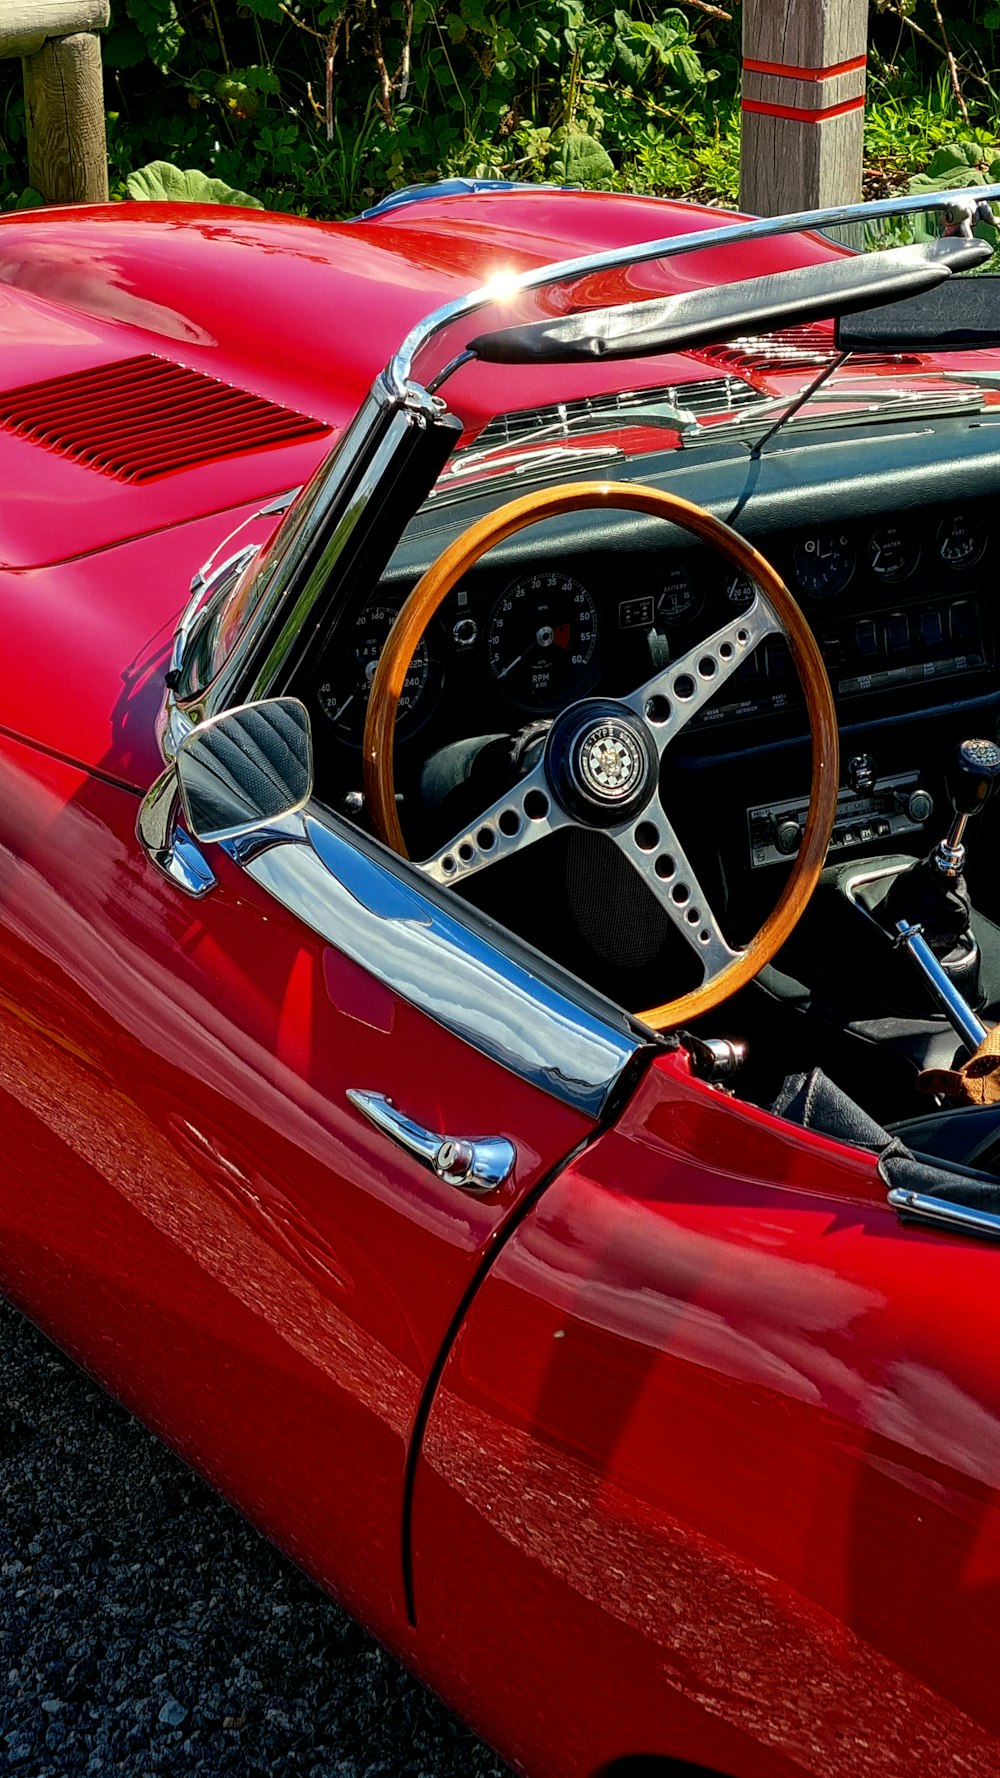 a red sports car with a wooden steering wheel